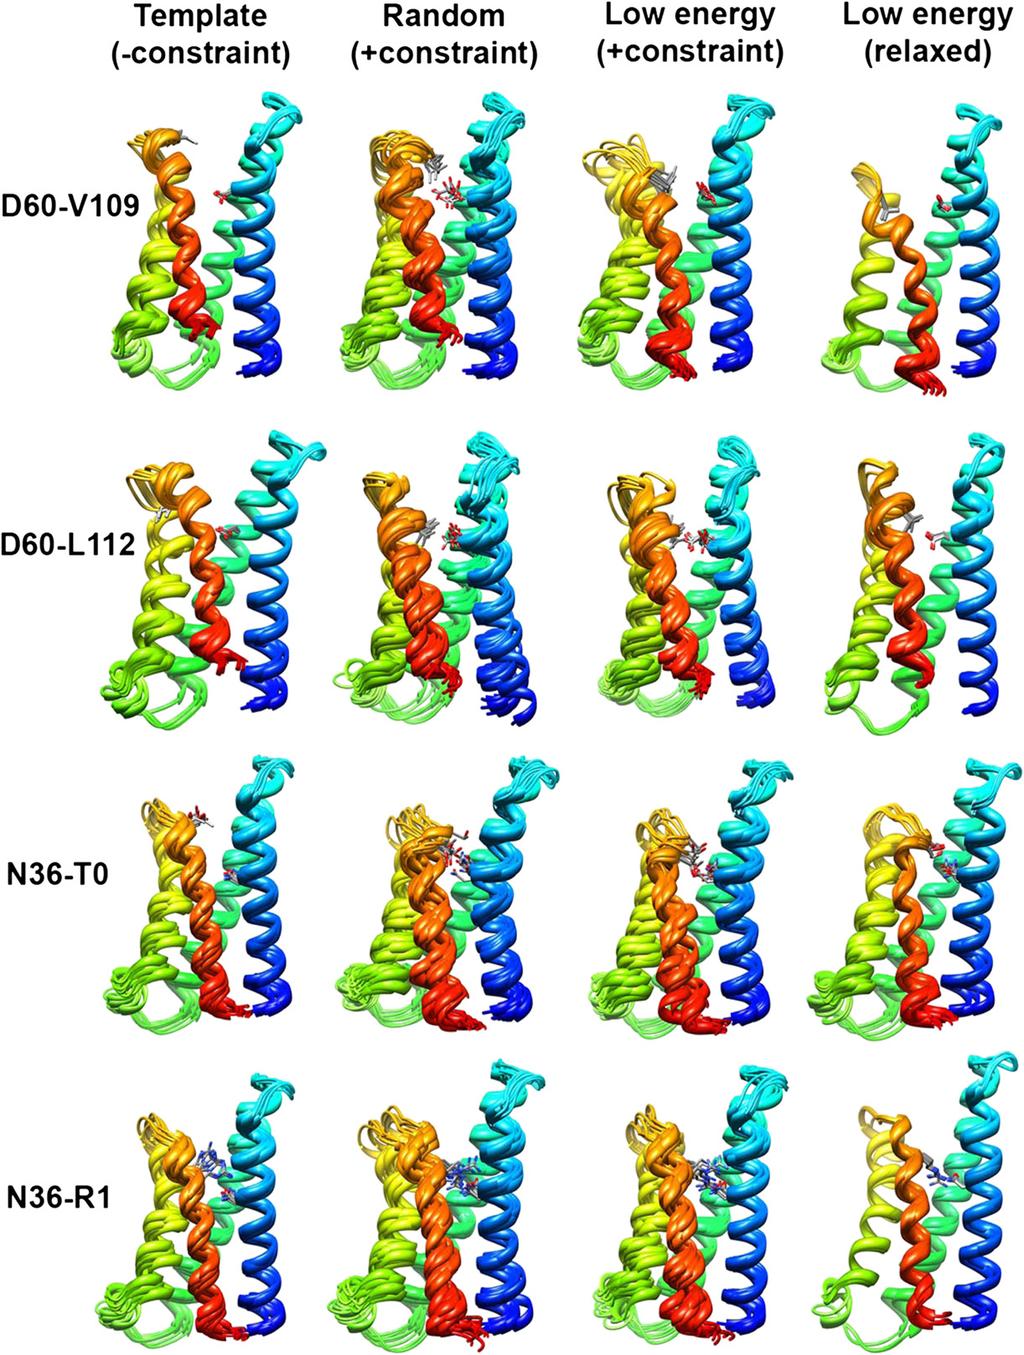 Fig. S10. Ensembles of NaChBac VSD models based on experimental constraints for D60-V109, D60-L112, N36-T0, and N36-R1 pairs.